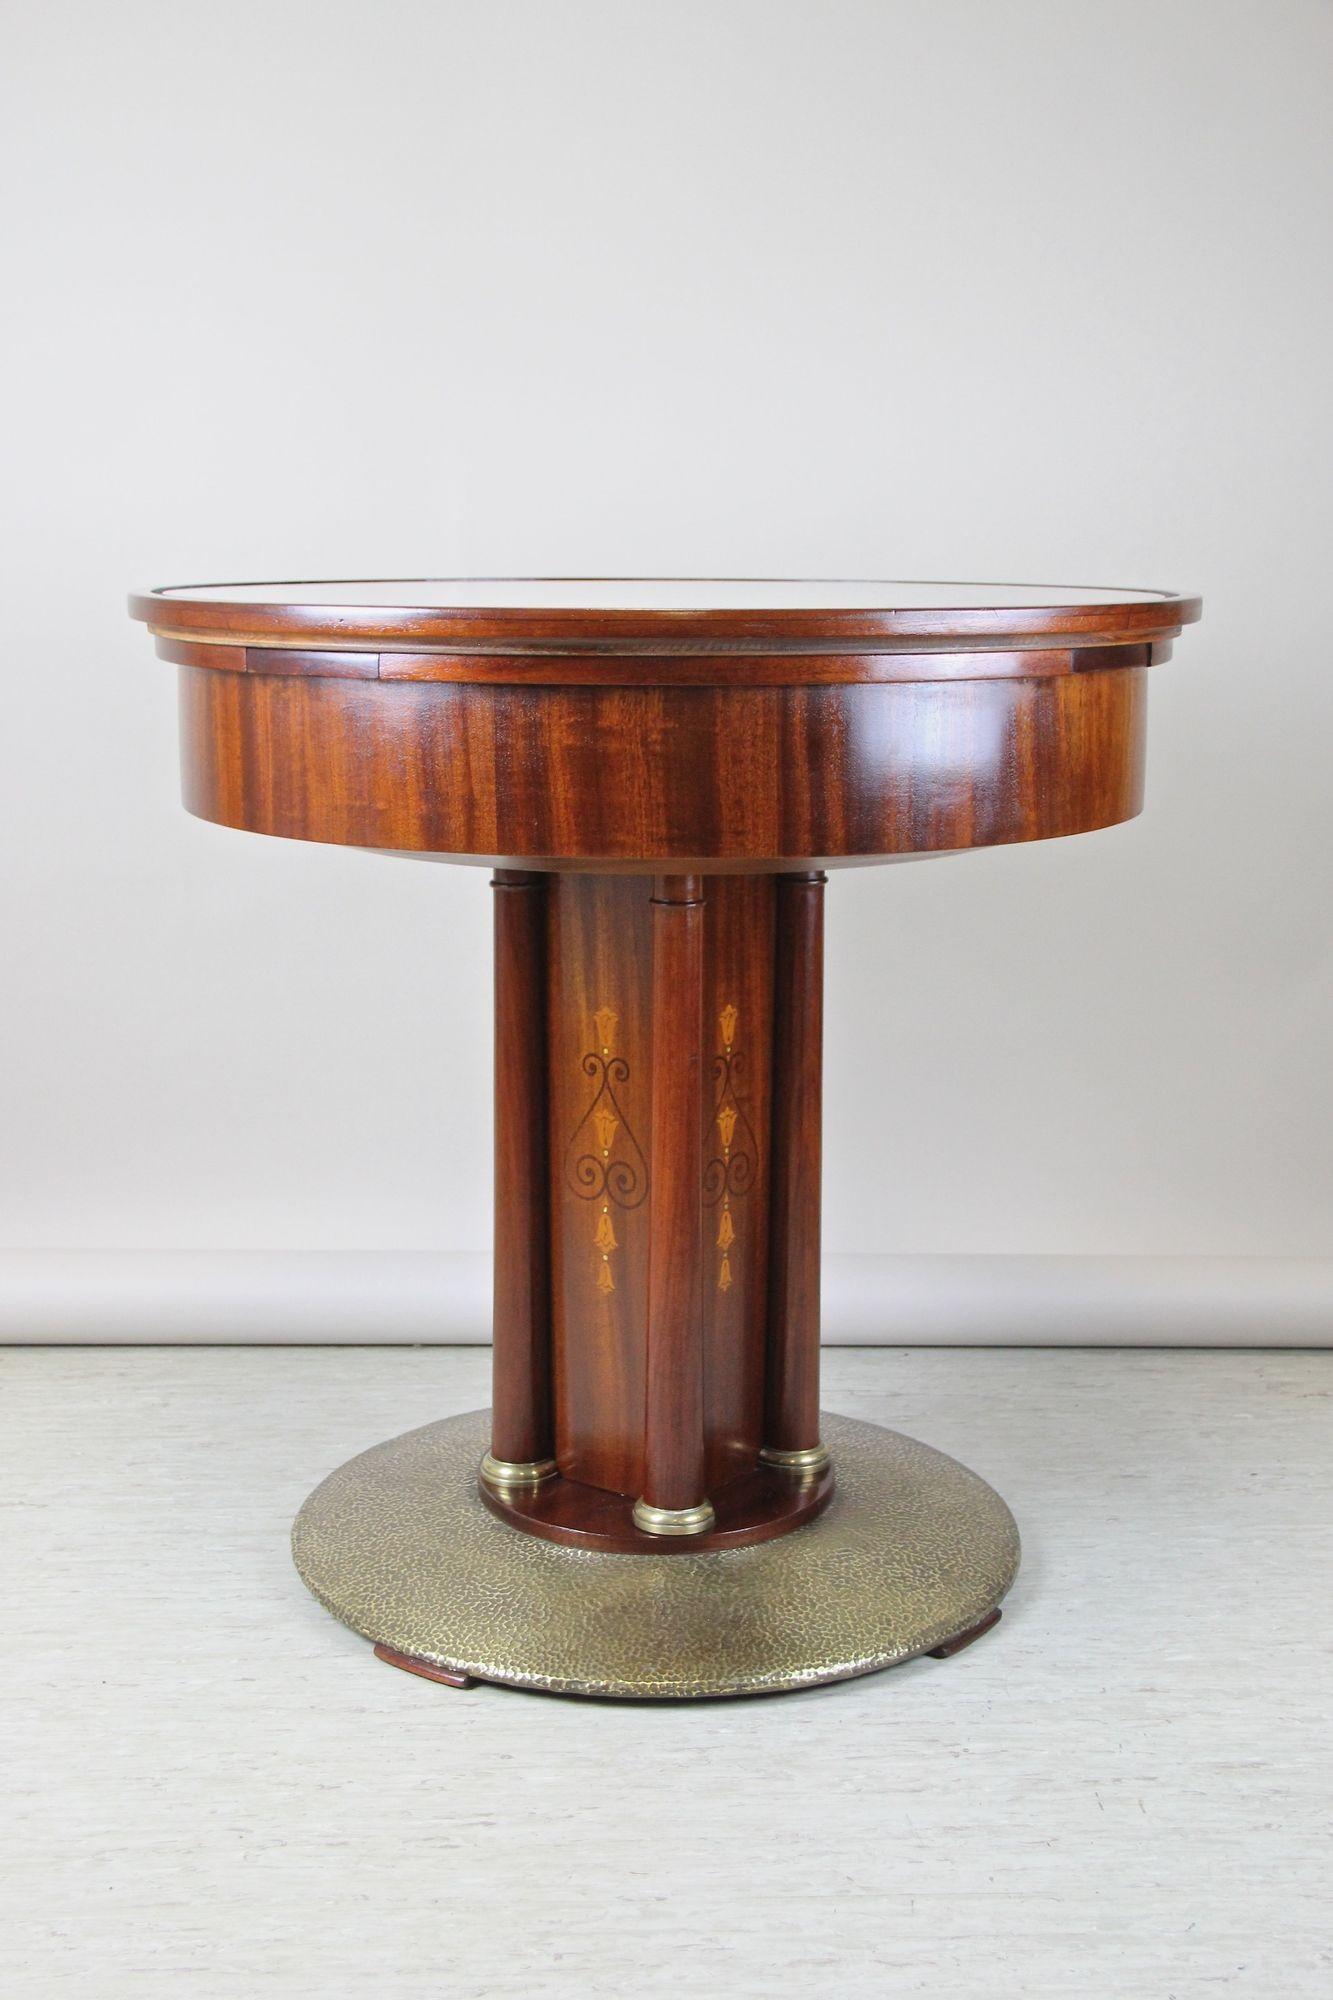 20th Century Art Nouveau Mahogany Gaming Table with Hammered Brass Base, Austria, circa 1910 For Sale